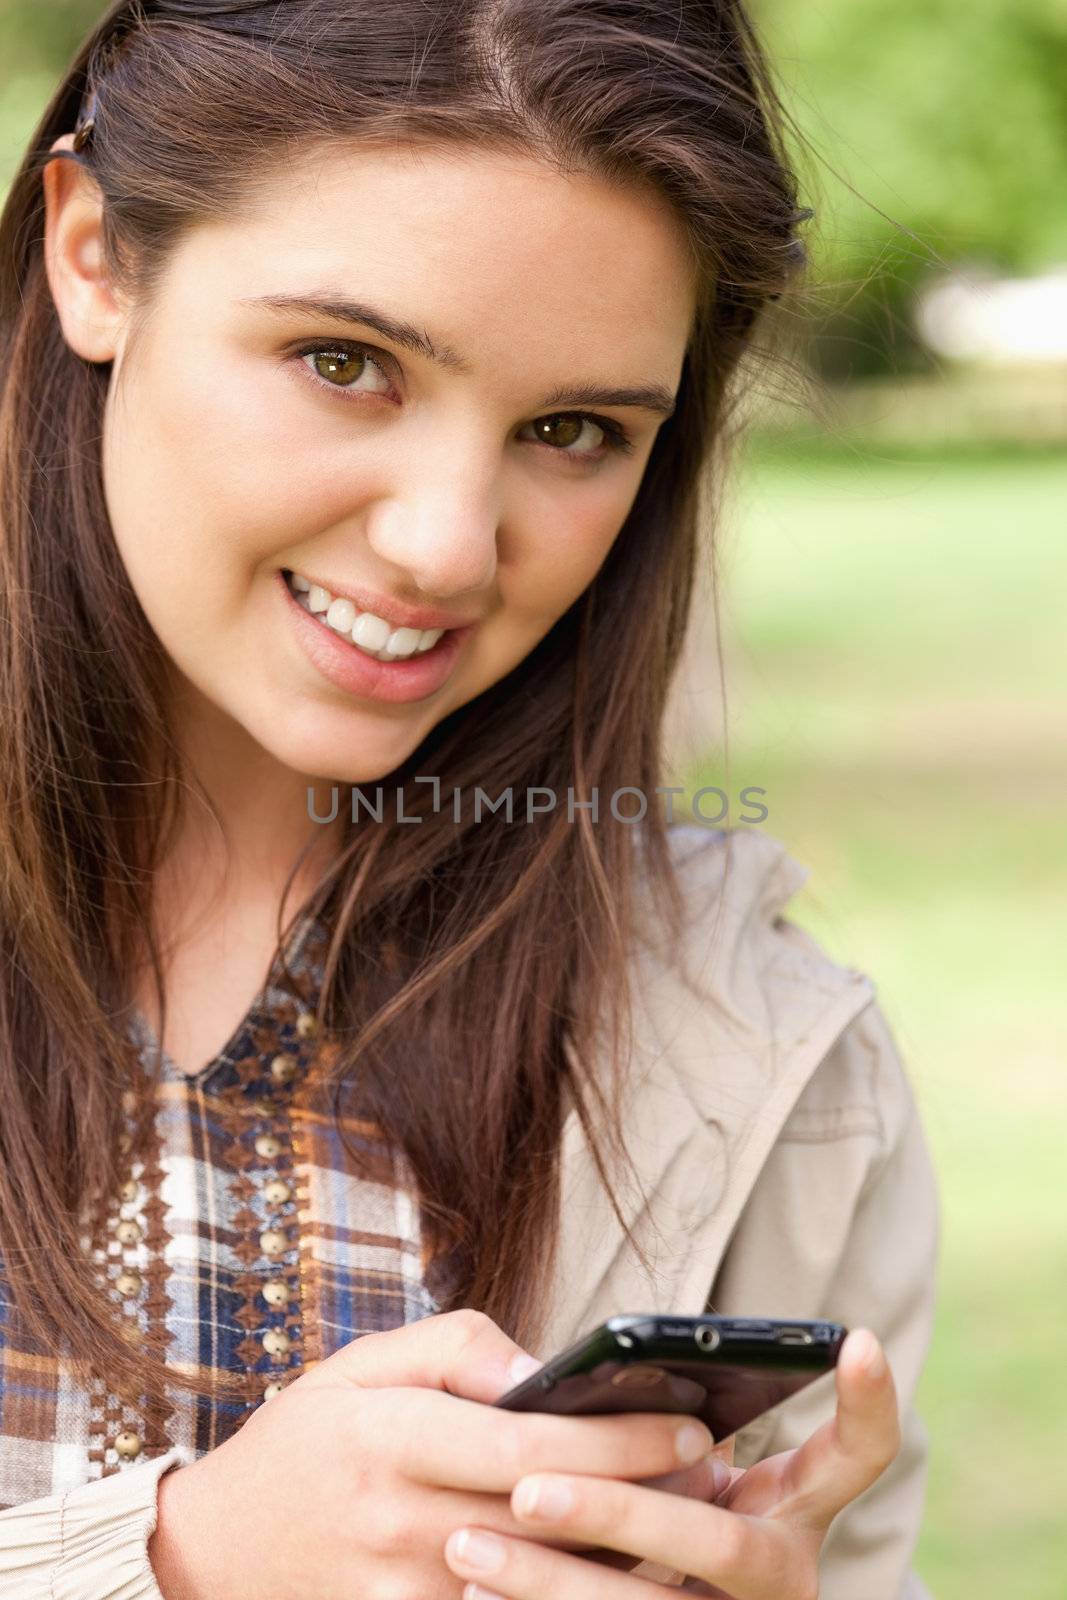 Portrait of a cute teenager using a smartphone in a park